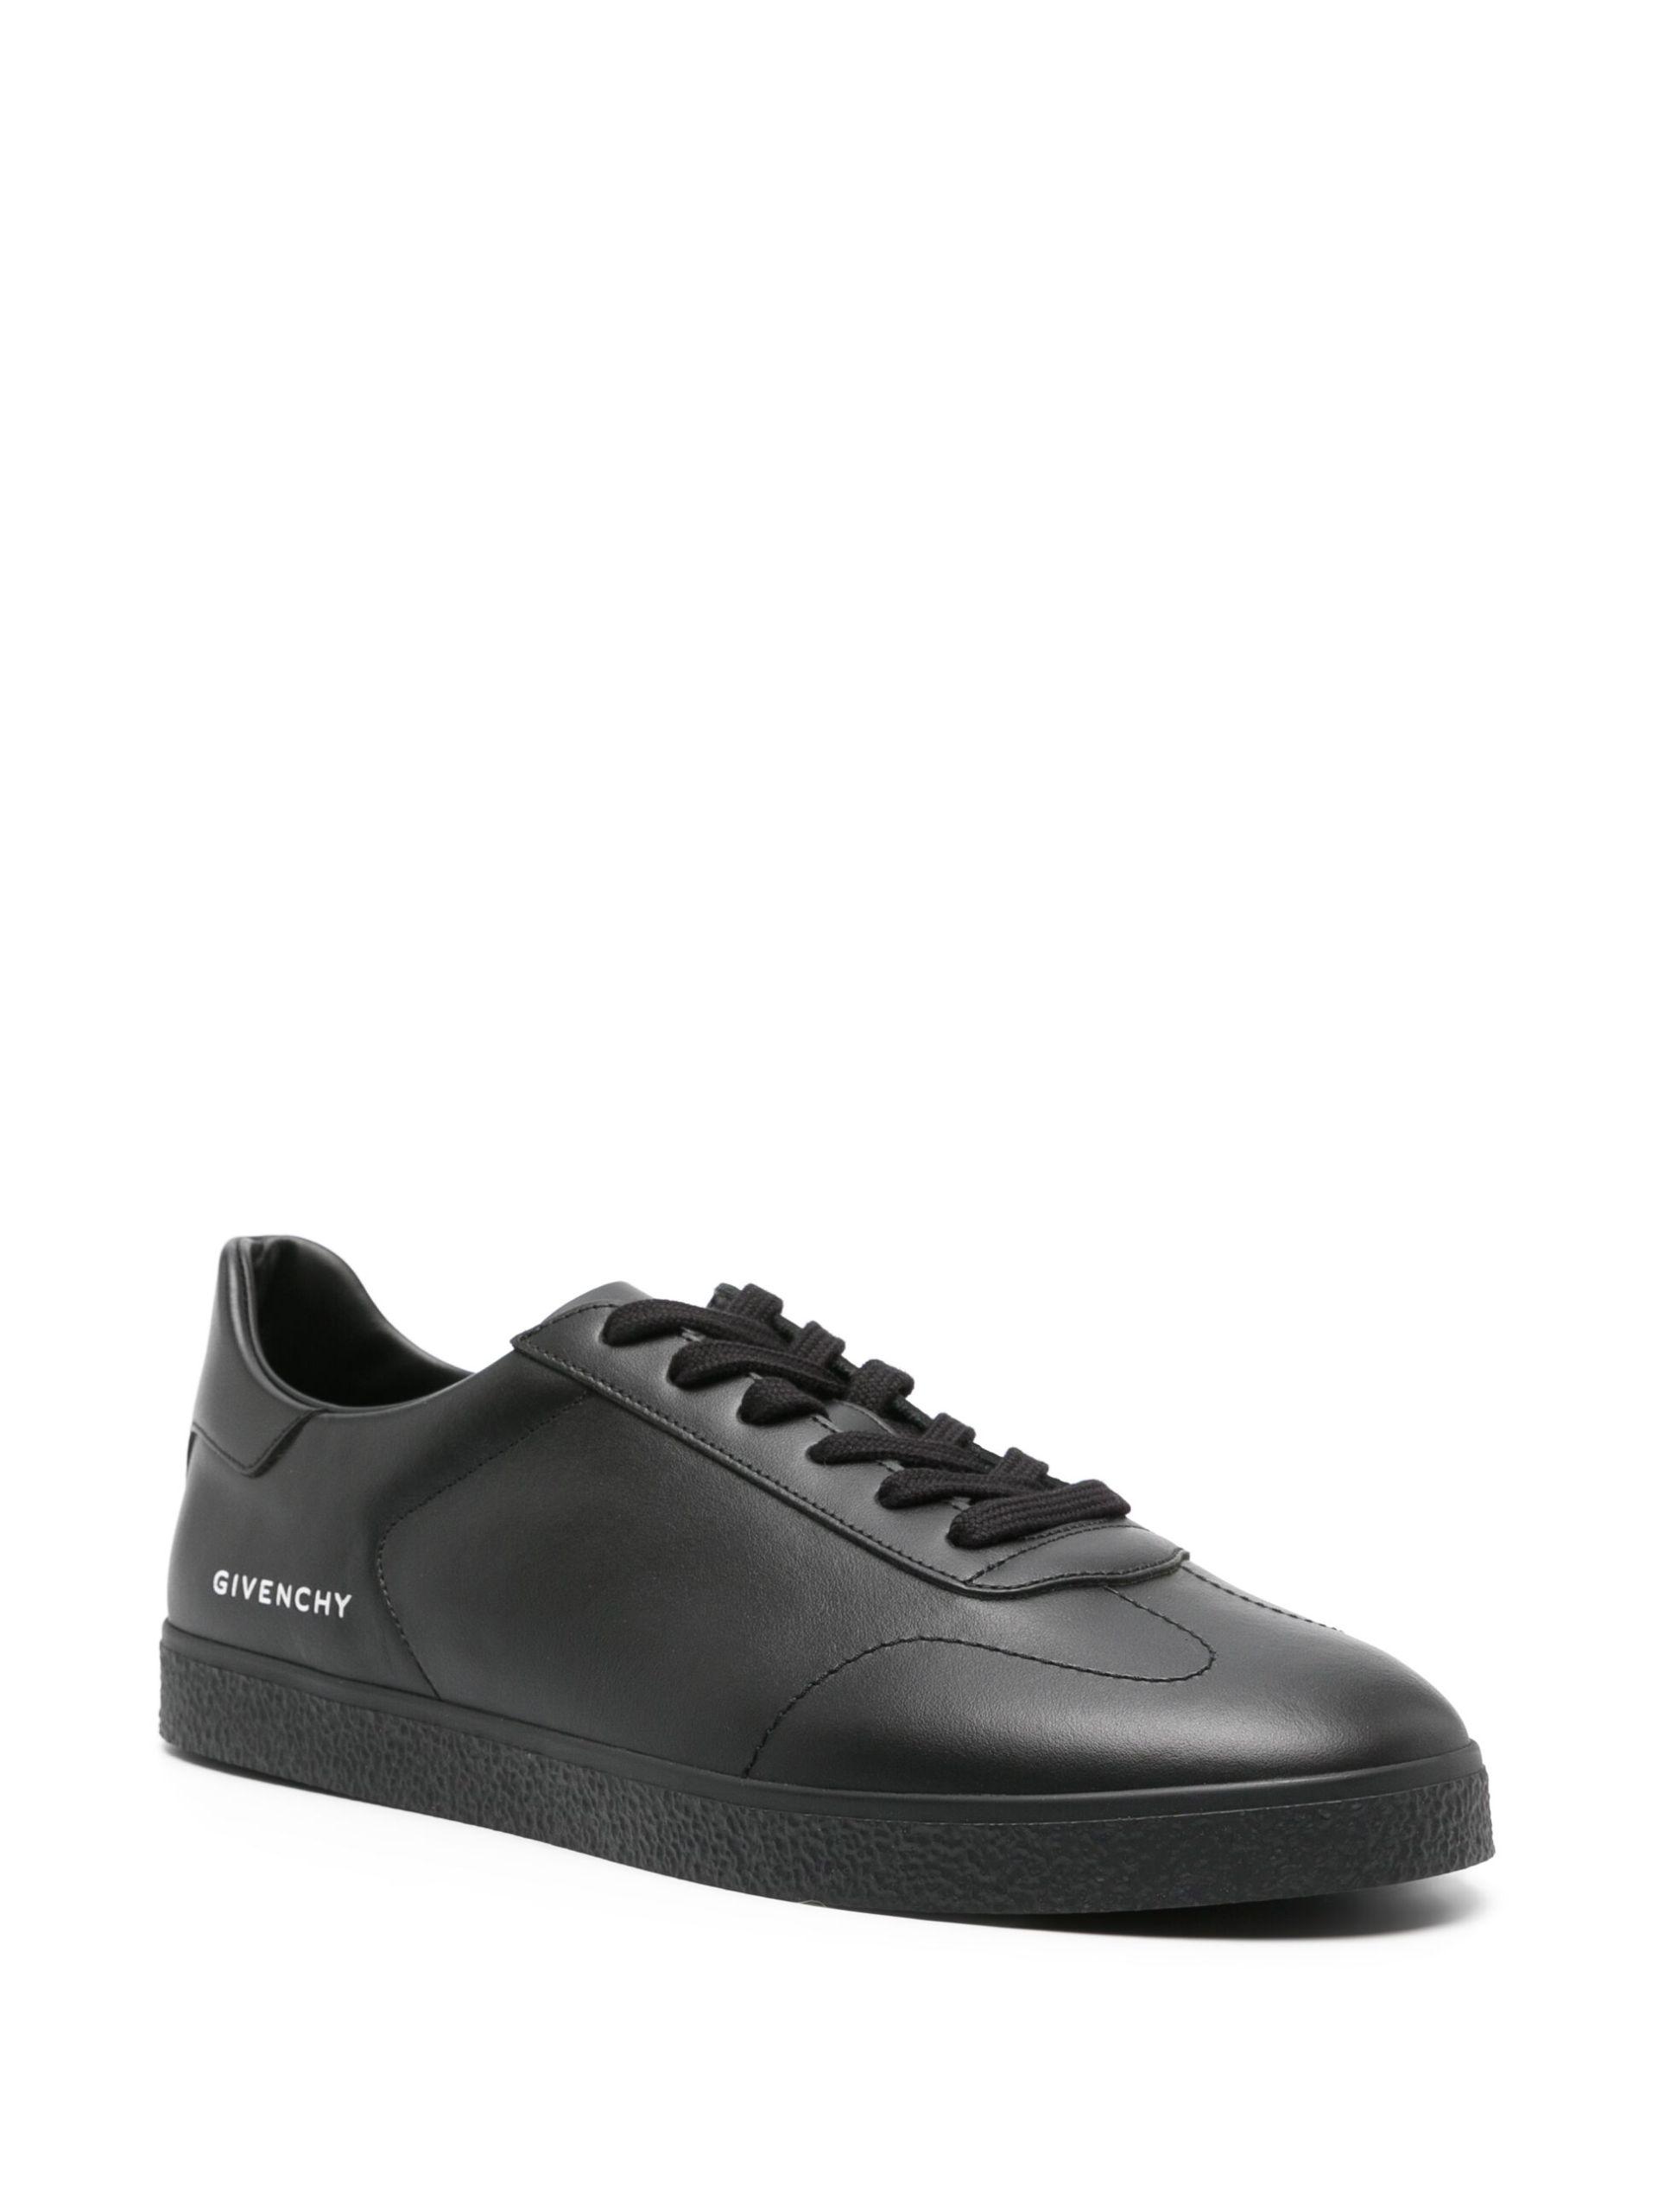 Givenchy Spectre Leather Sneakers in Black | Lyst